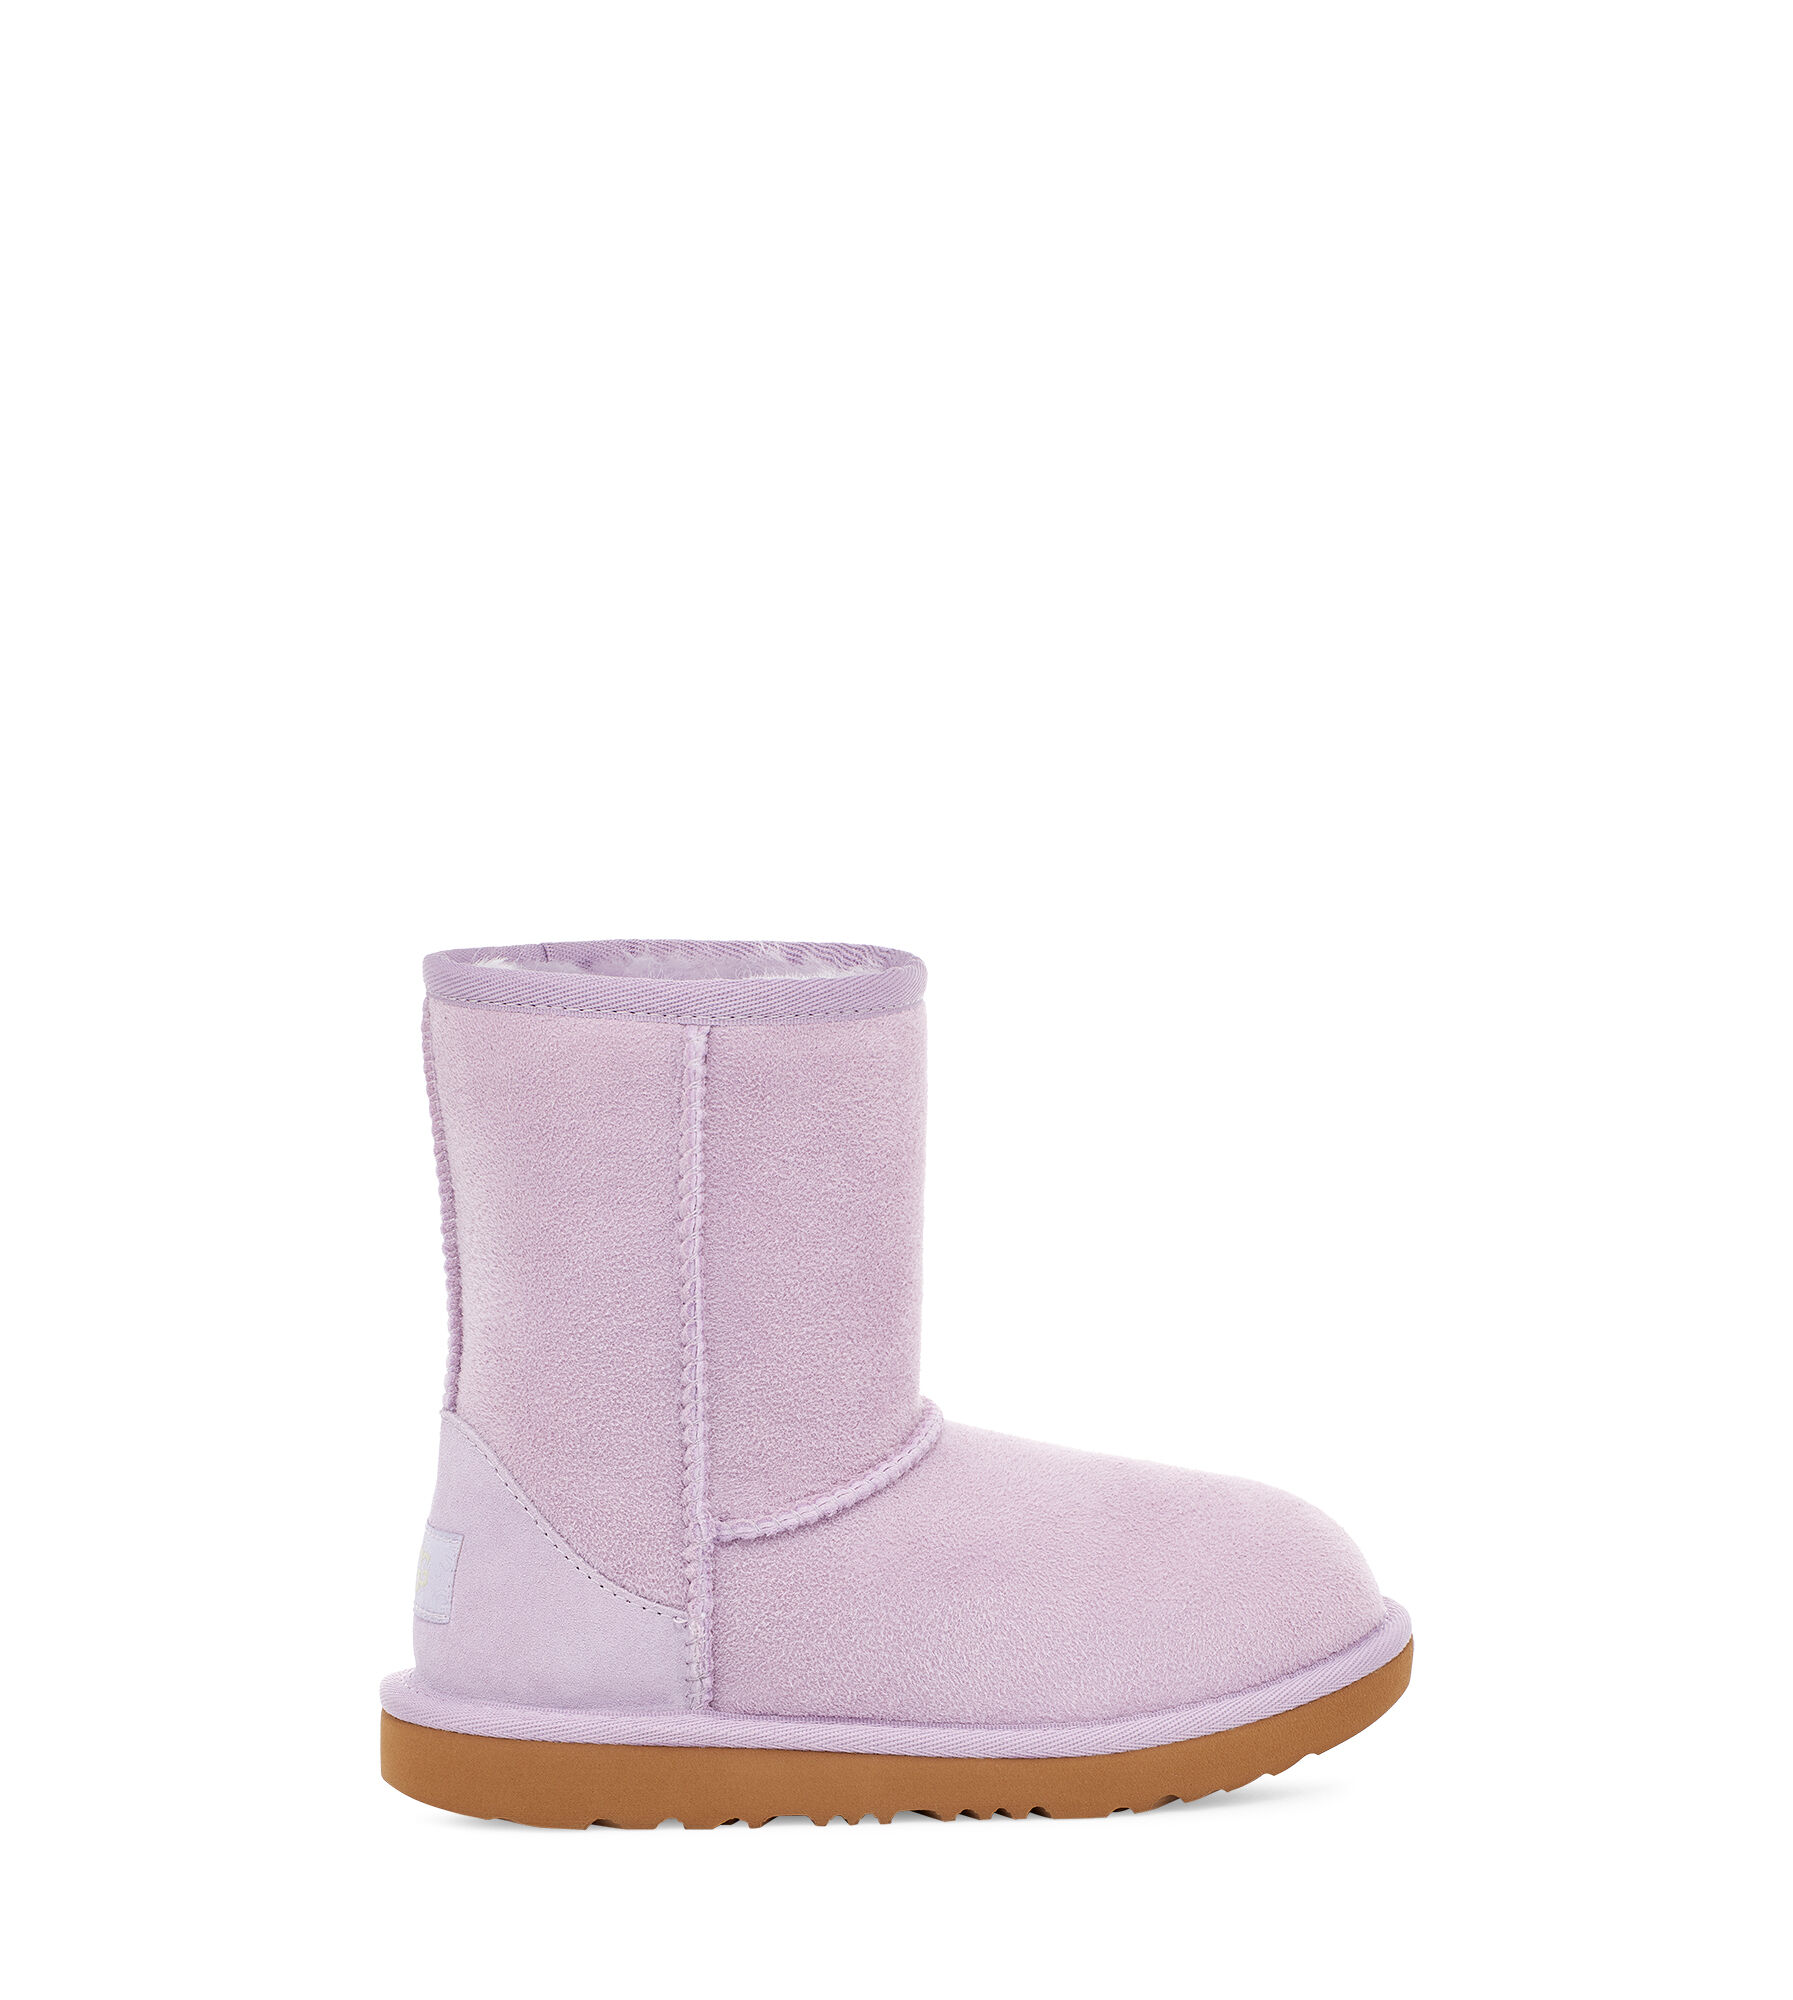 uggs size 4 youth